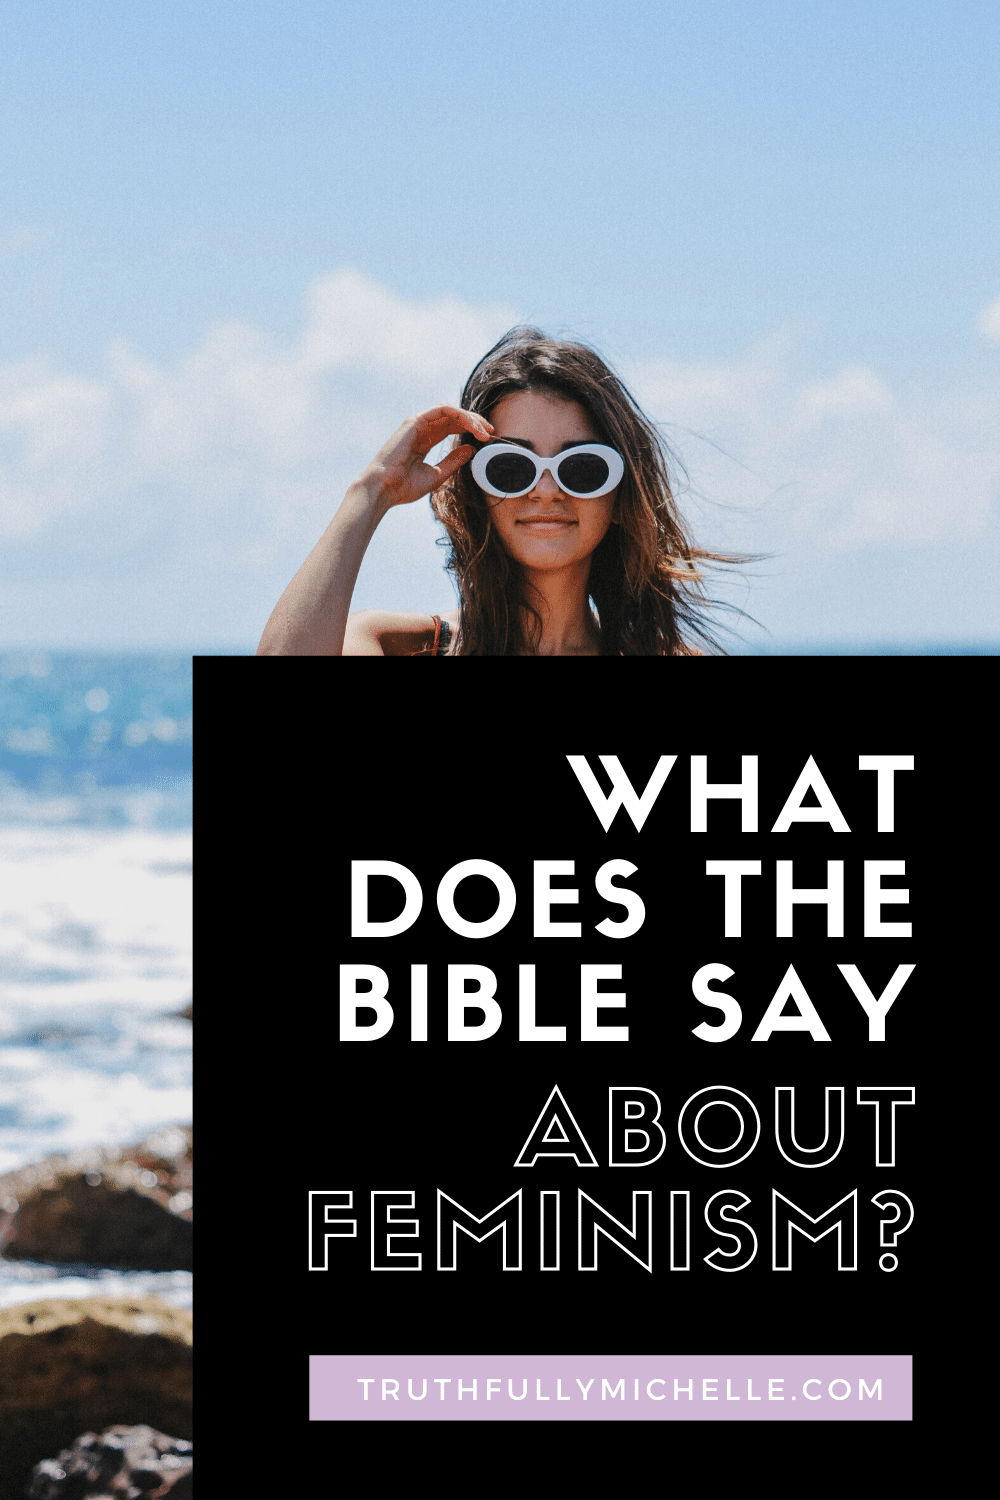 feminism and christianity, christianity and feminism in conversation, christian feminism, christian feminism today, christian view on feminism, feminism and the bible, what the bible says about feminism